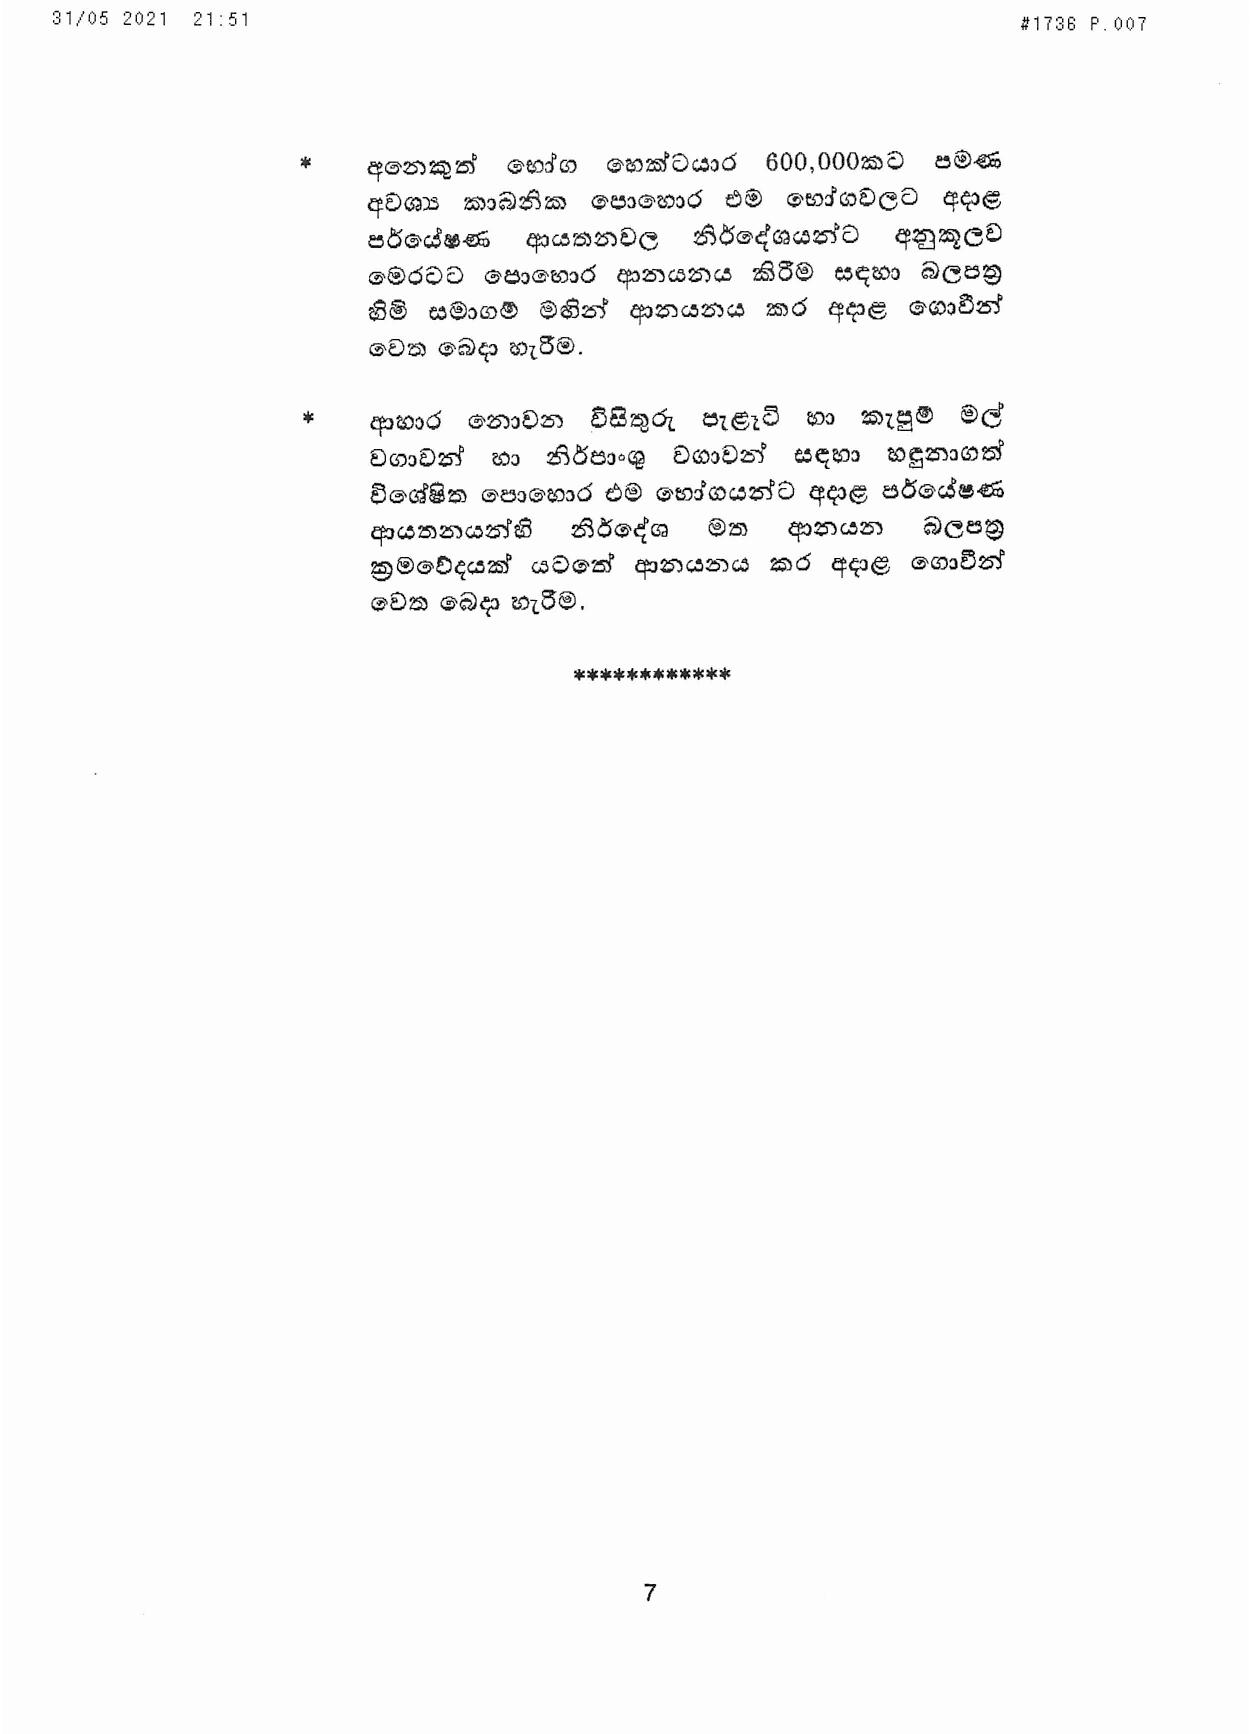 Cabinet Decision on 31.05.2021 page 007